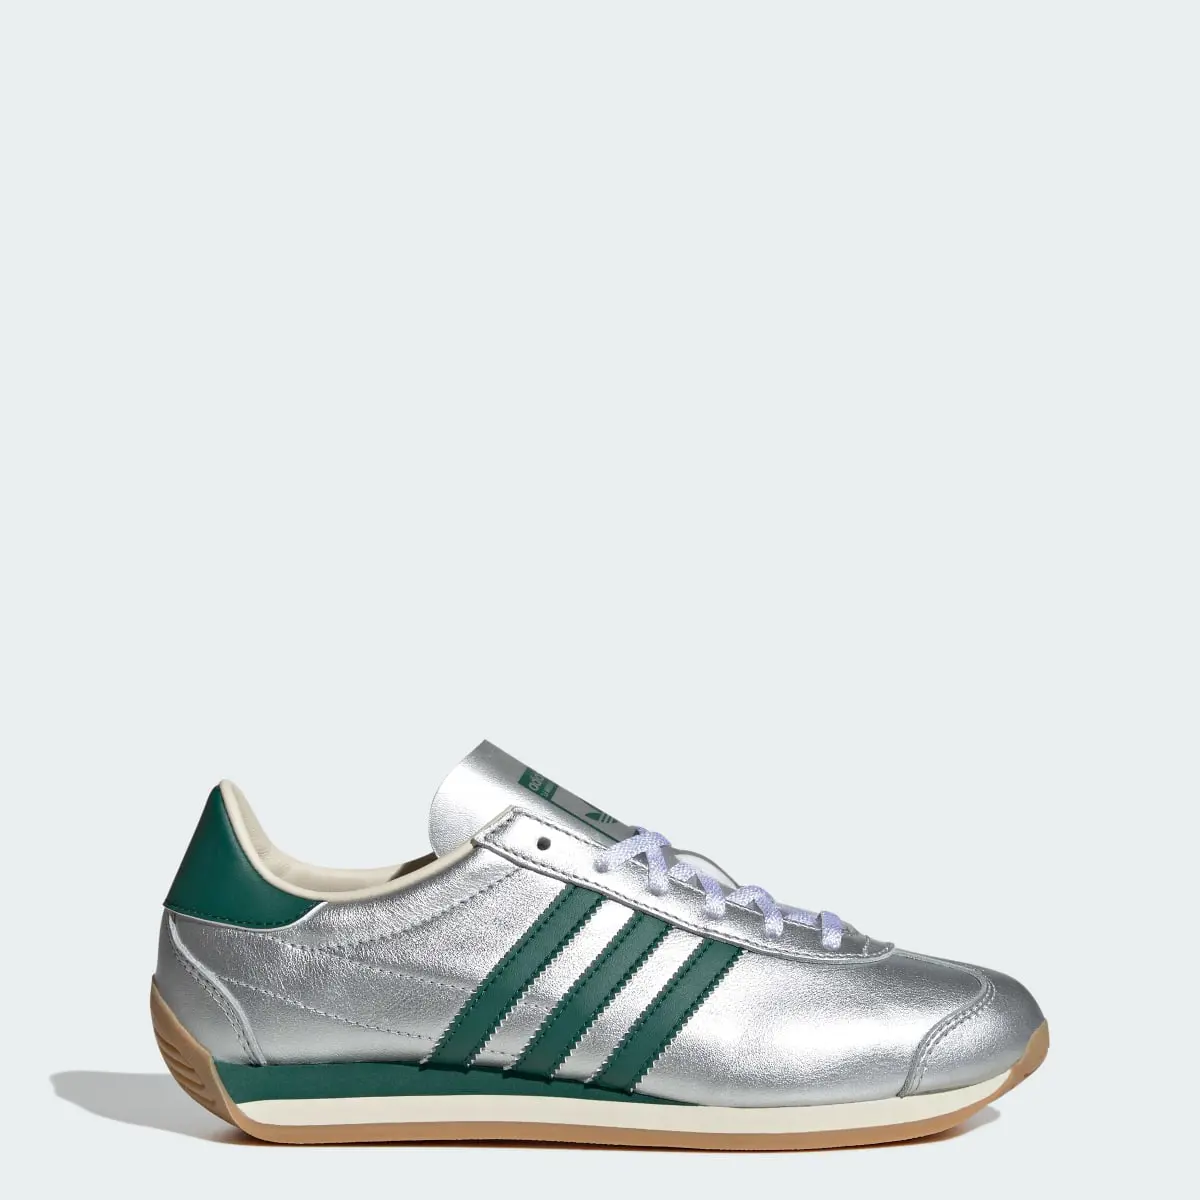 Adidas Chaussure Country OG. 1